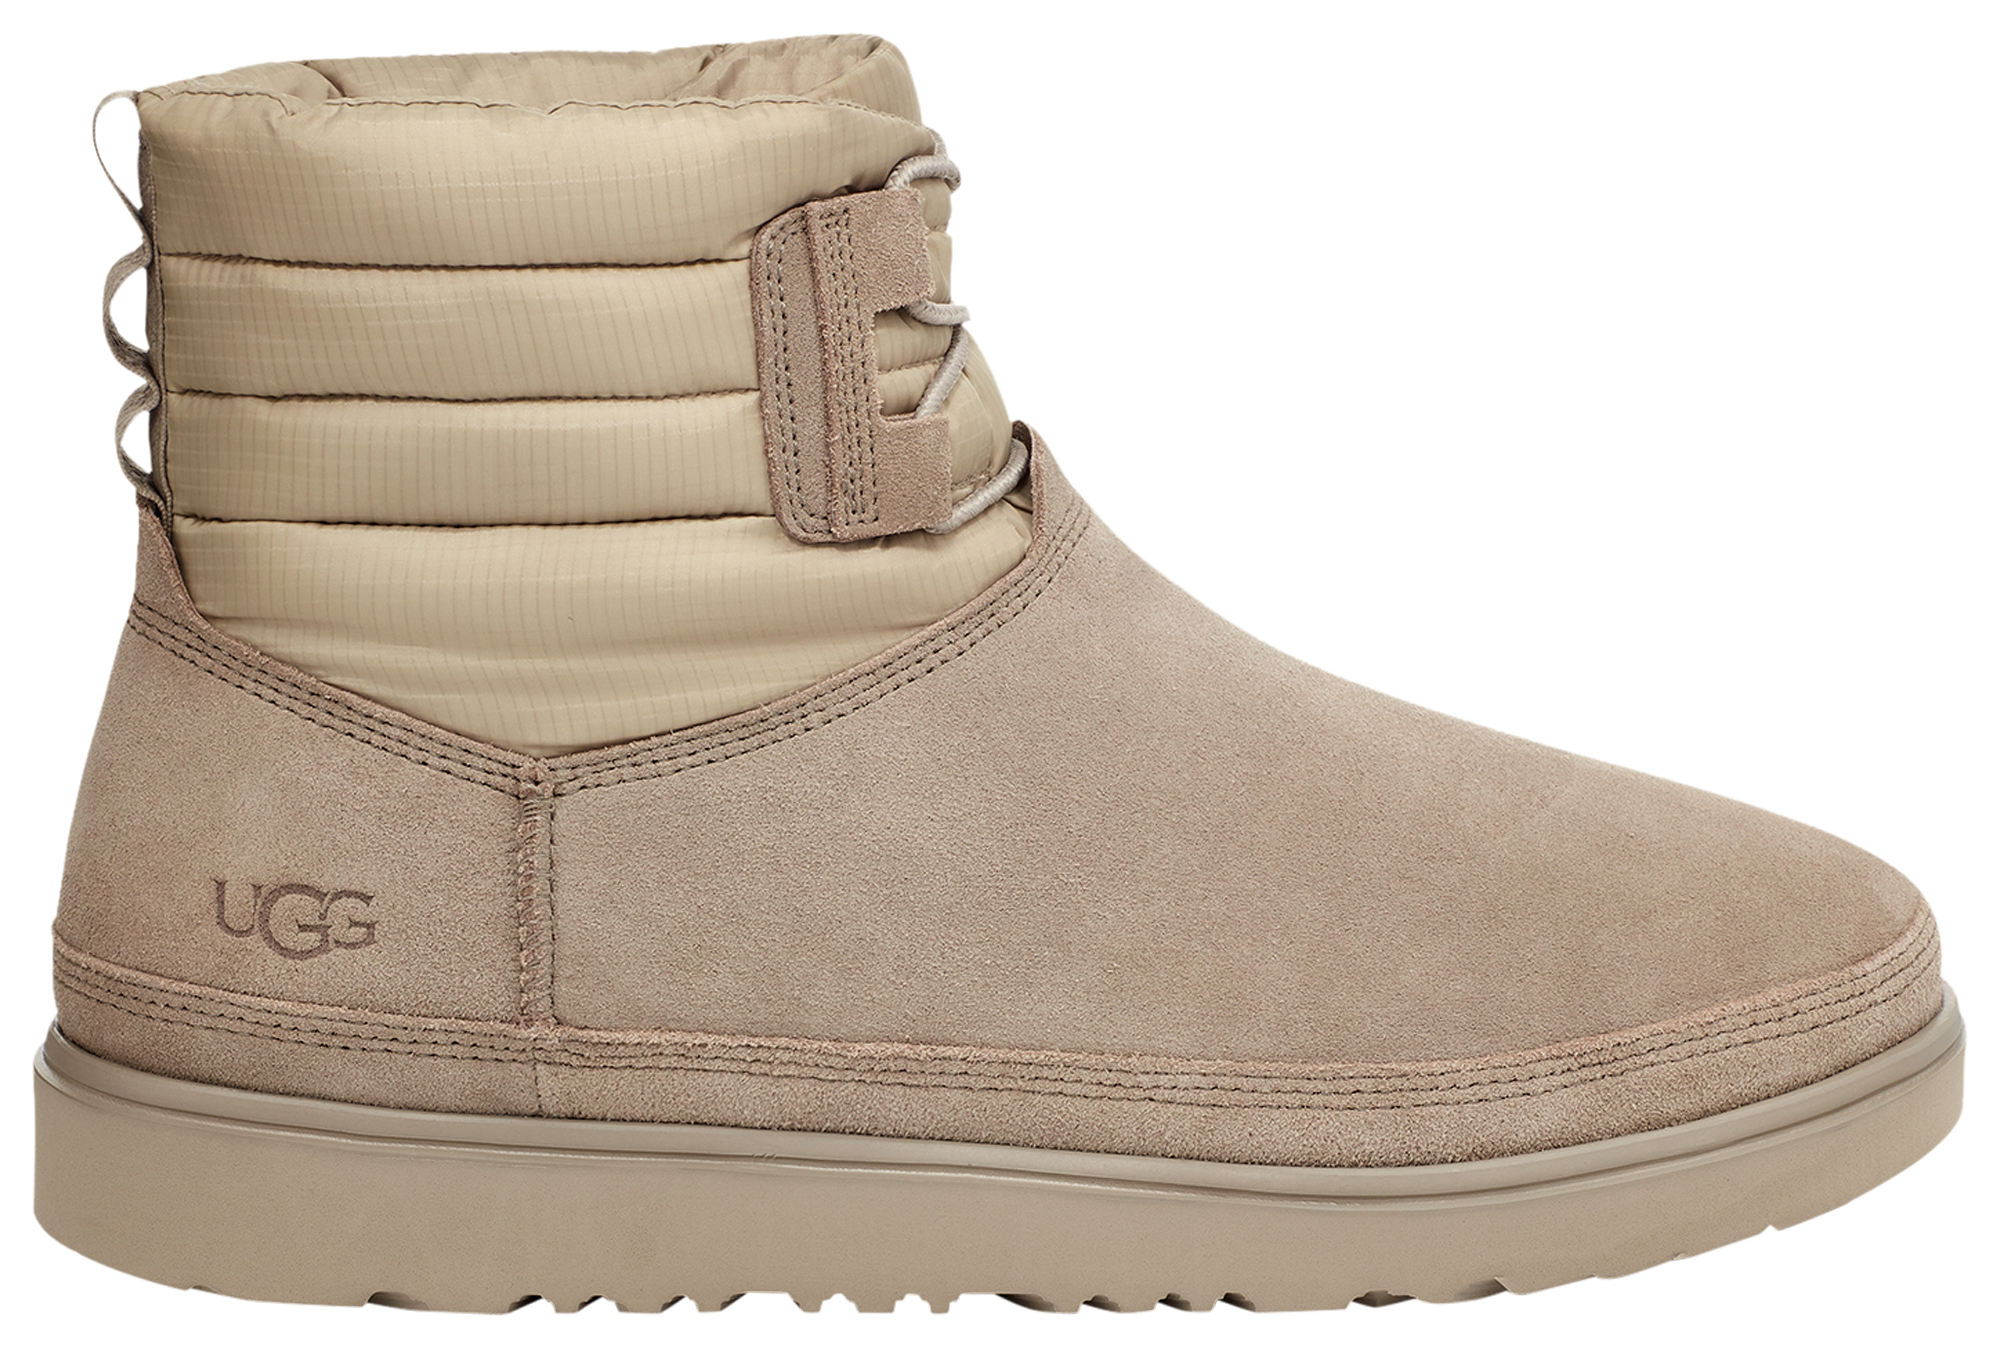 Ugg Men's Classic Mini Lace-Up Weather Boots